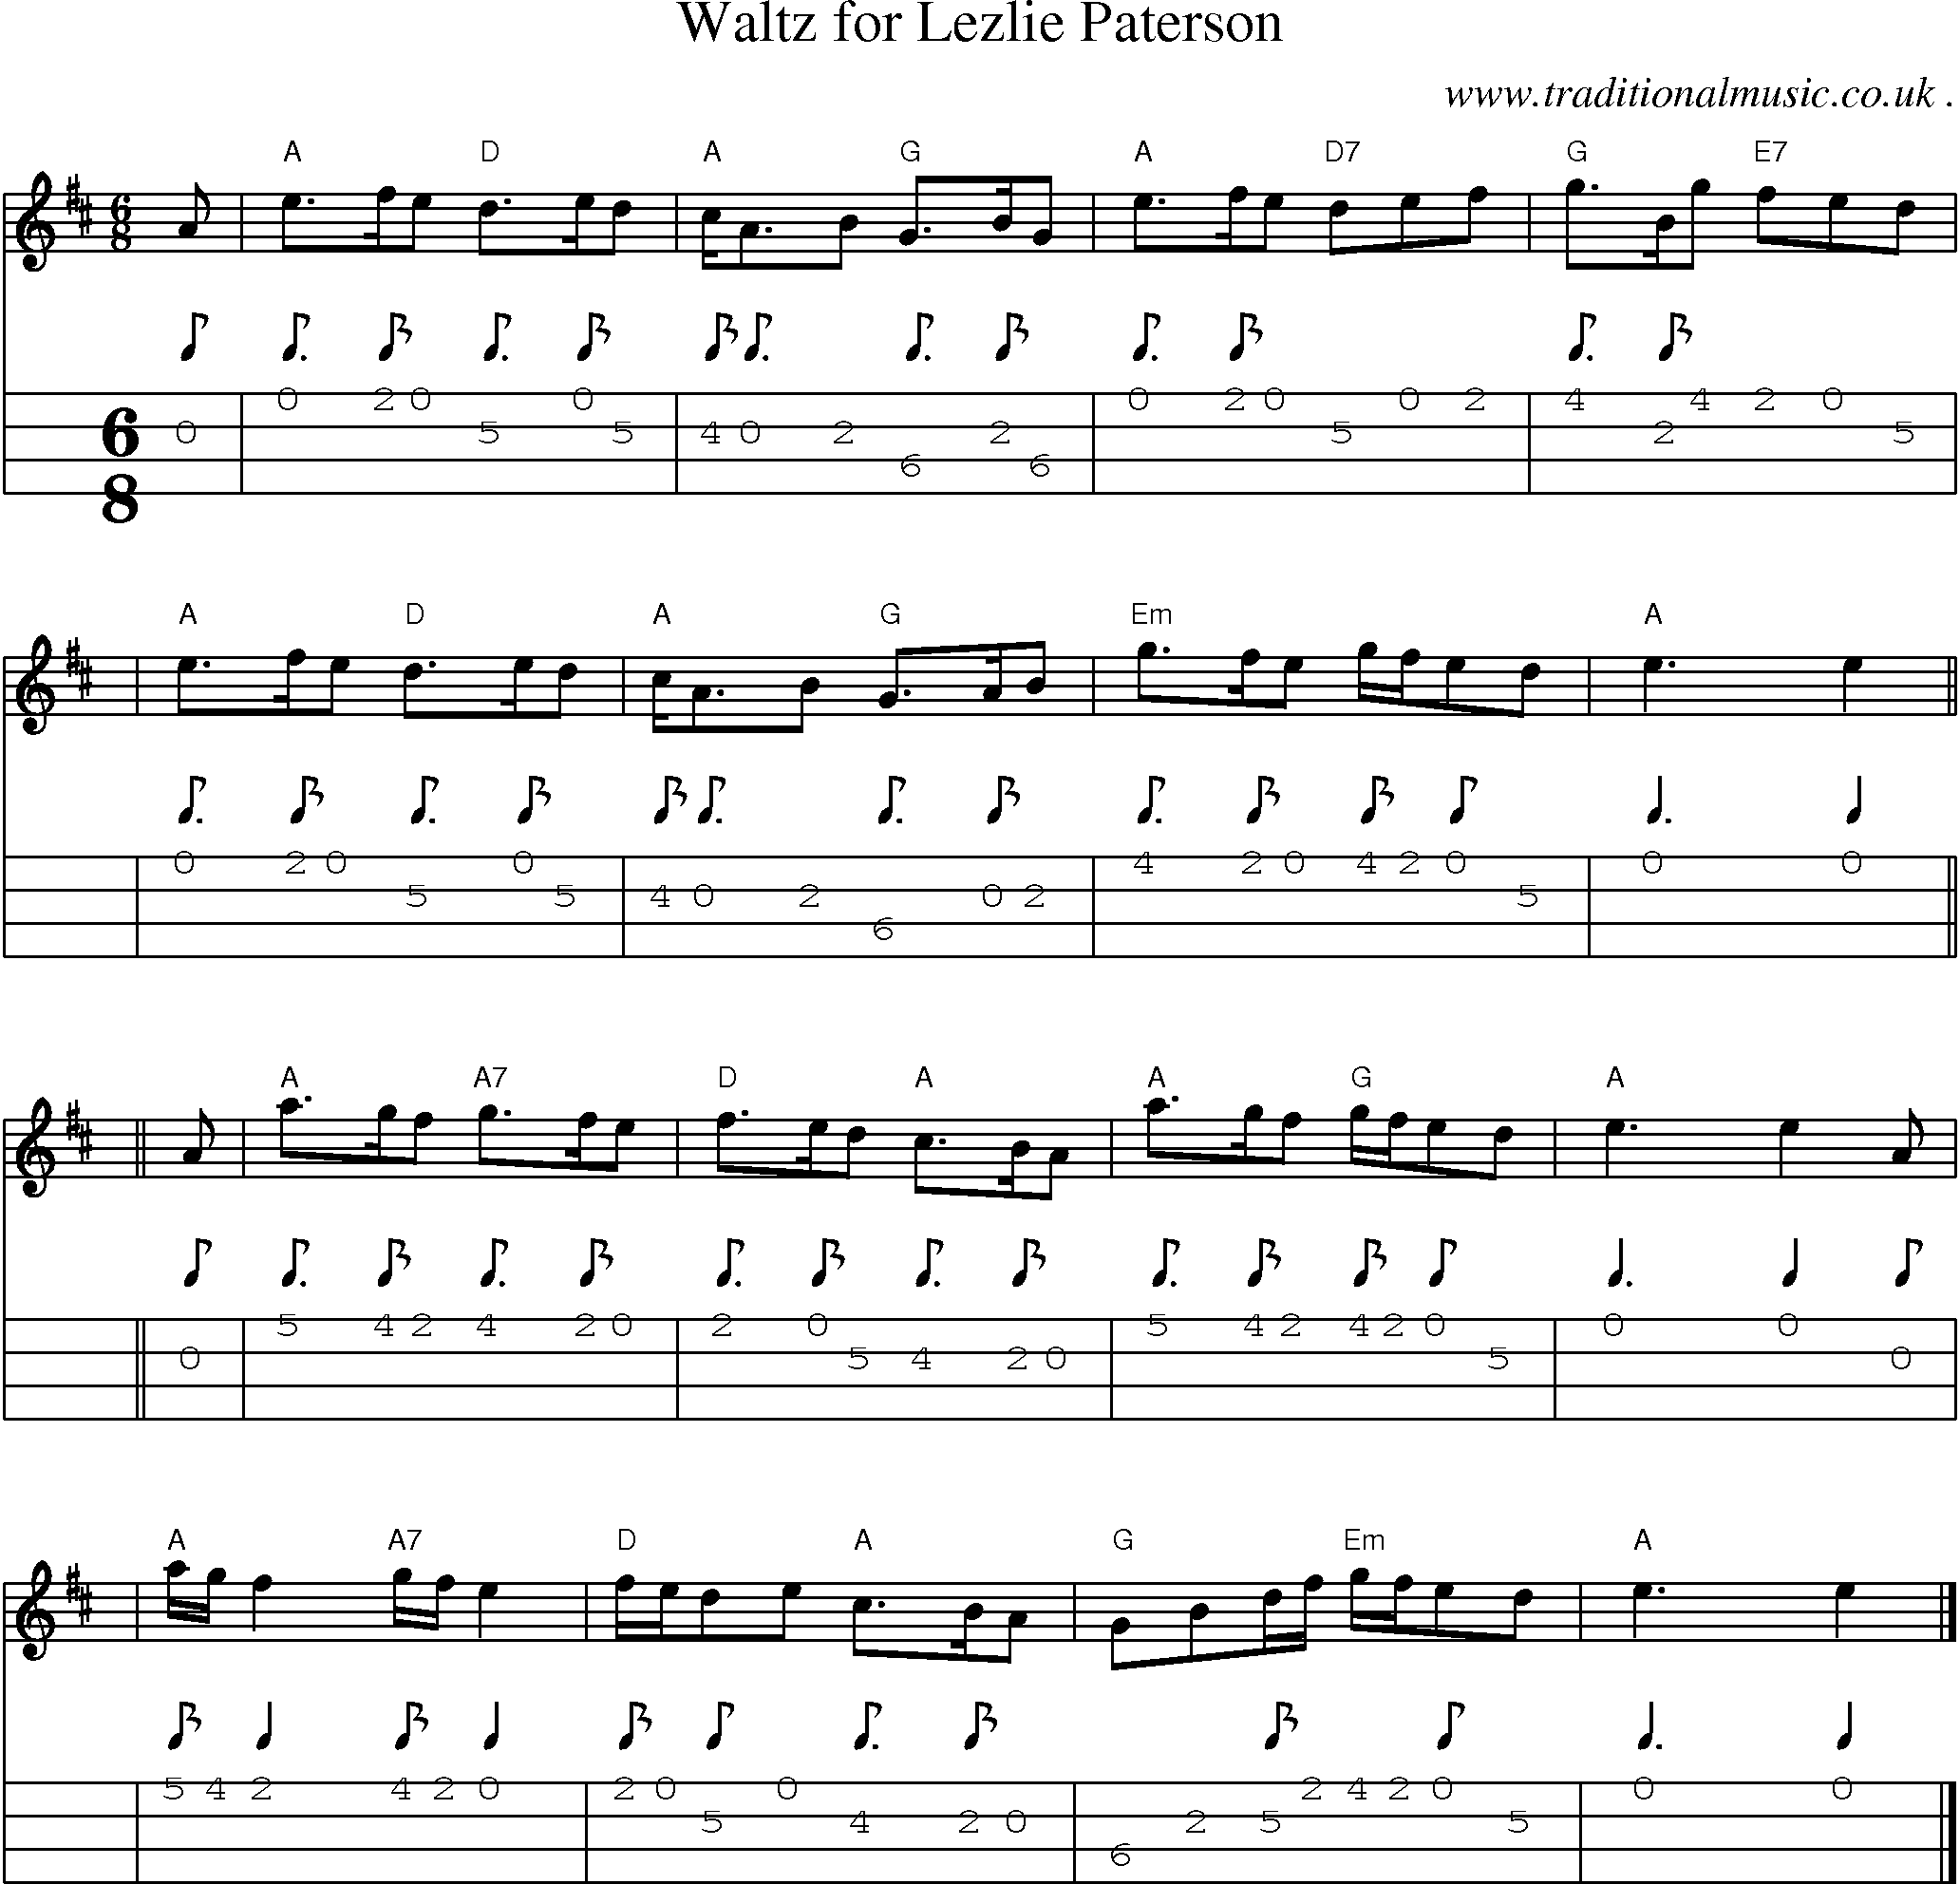 Sheet-music  score, Chords and Mandolin Tabs for Waltz For Lezlie Paterson